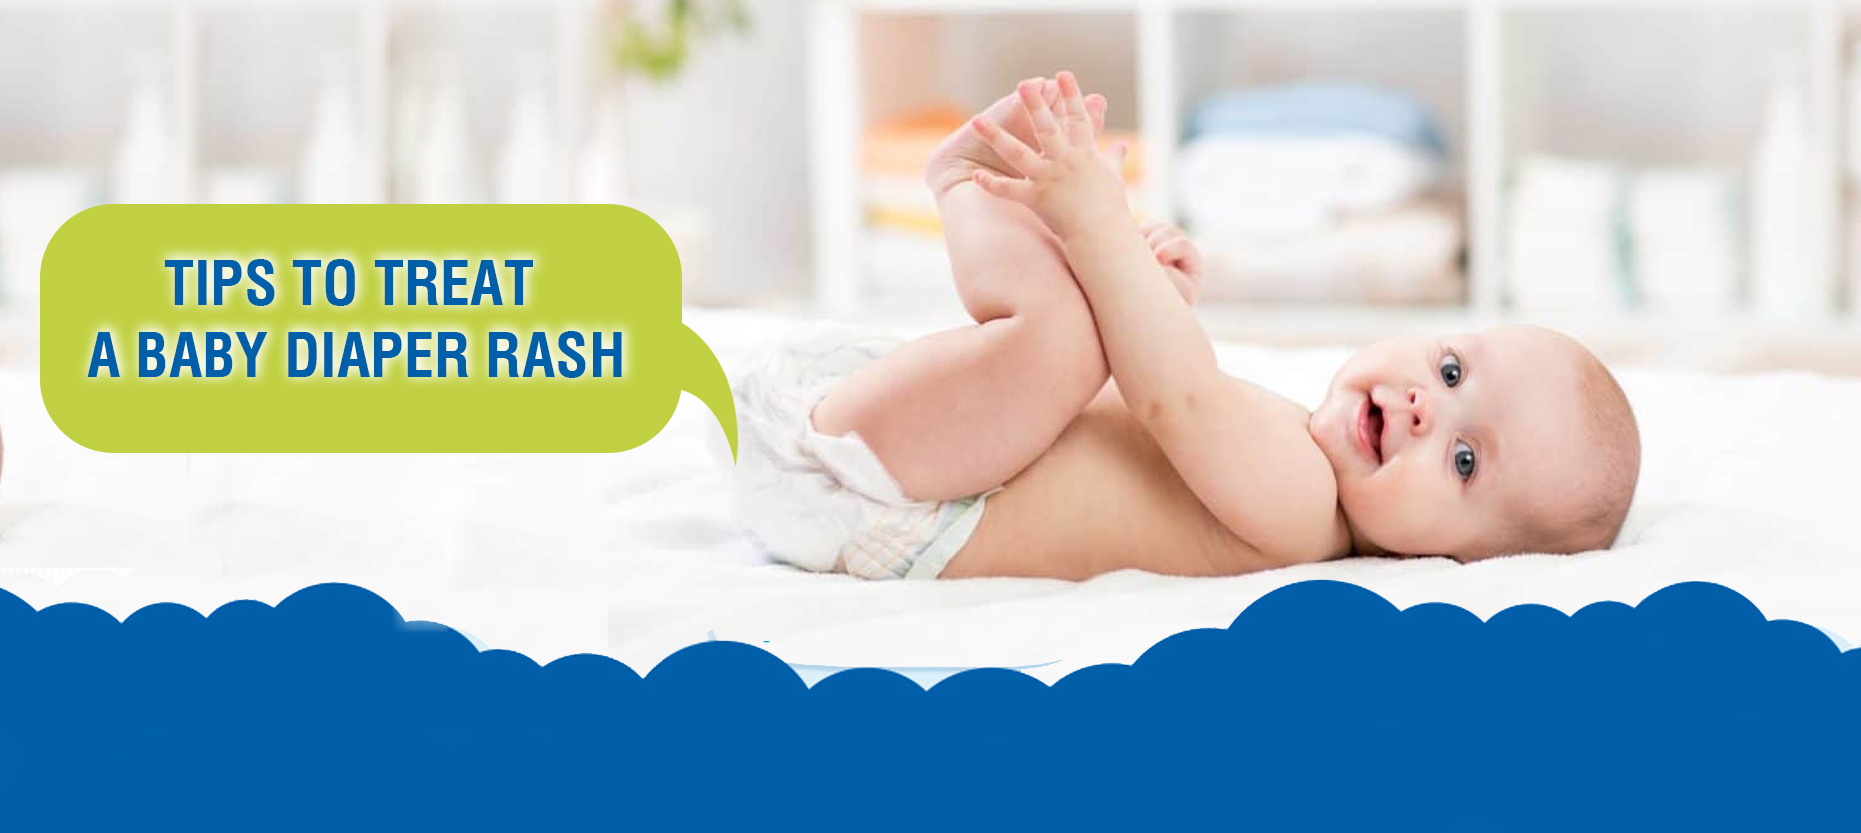 You Will Thank Us – 3 Tips to Diaper Rash That You Need to Know